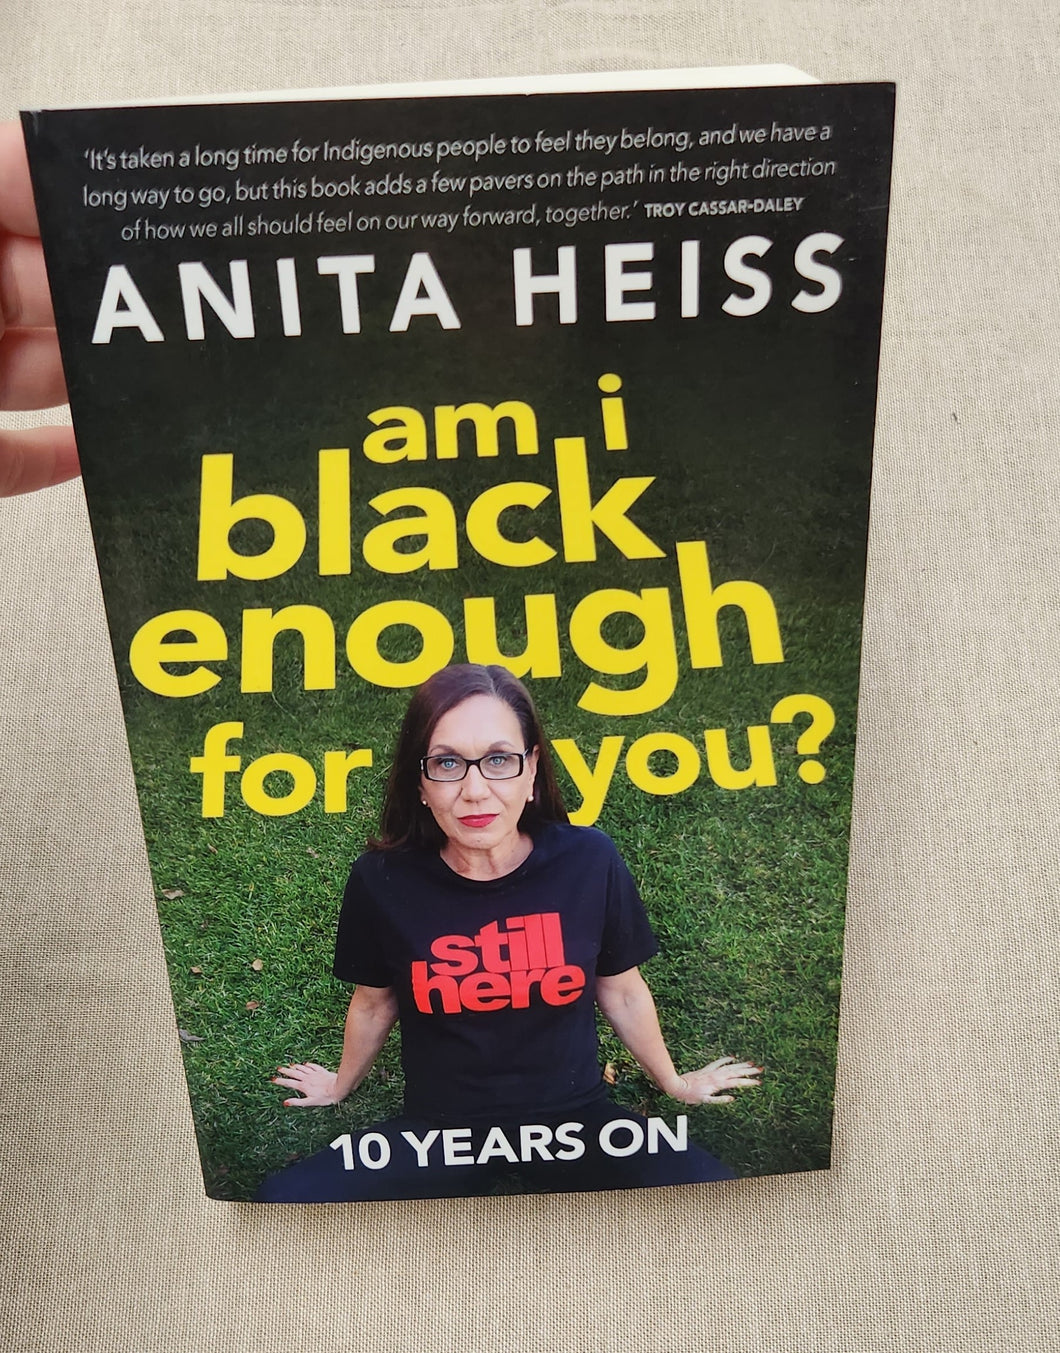 Am I black enough for you? - 10 years on